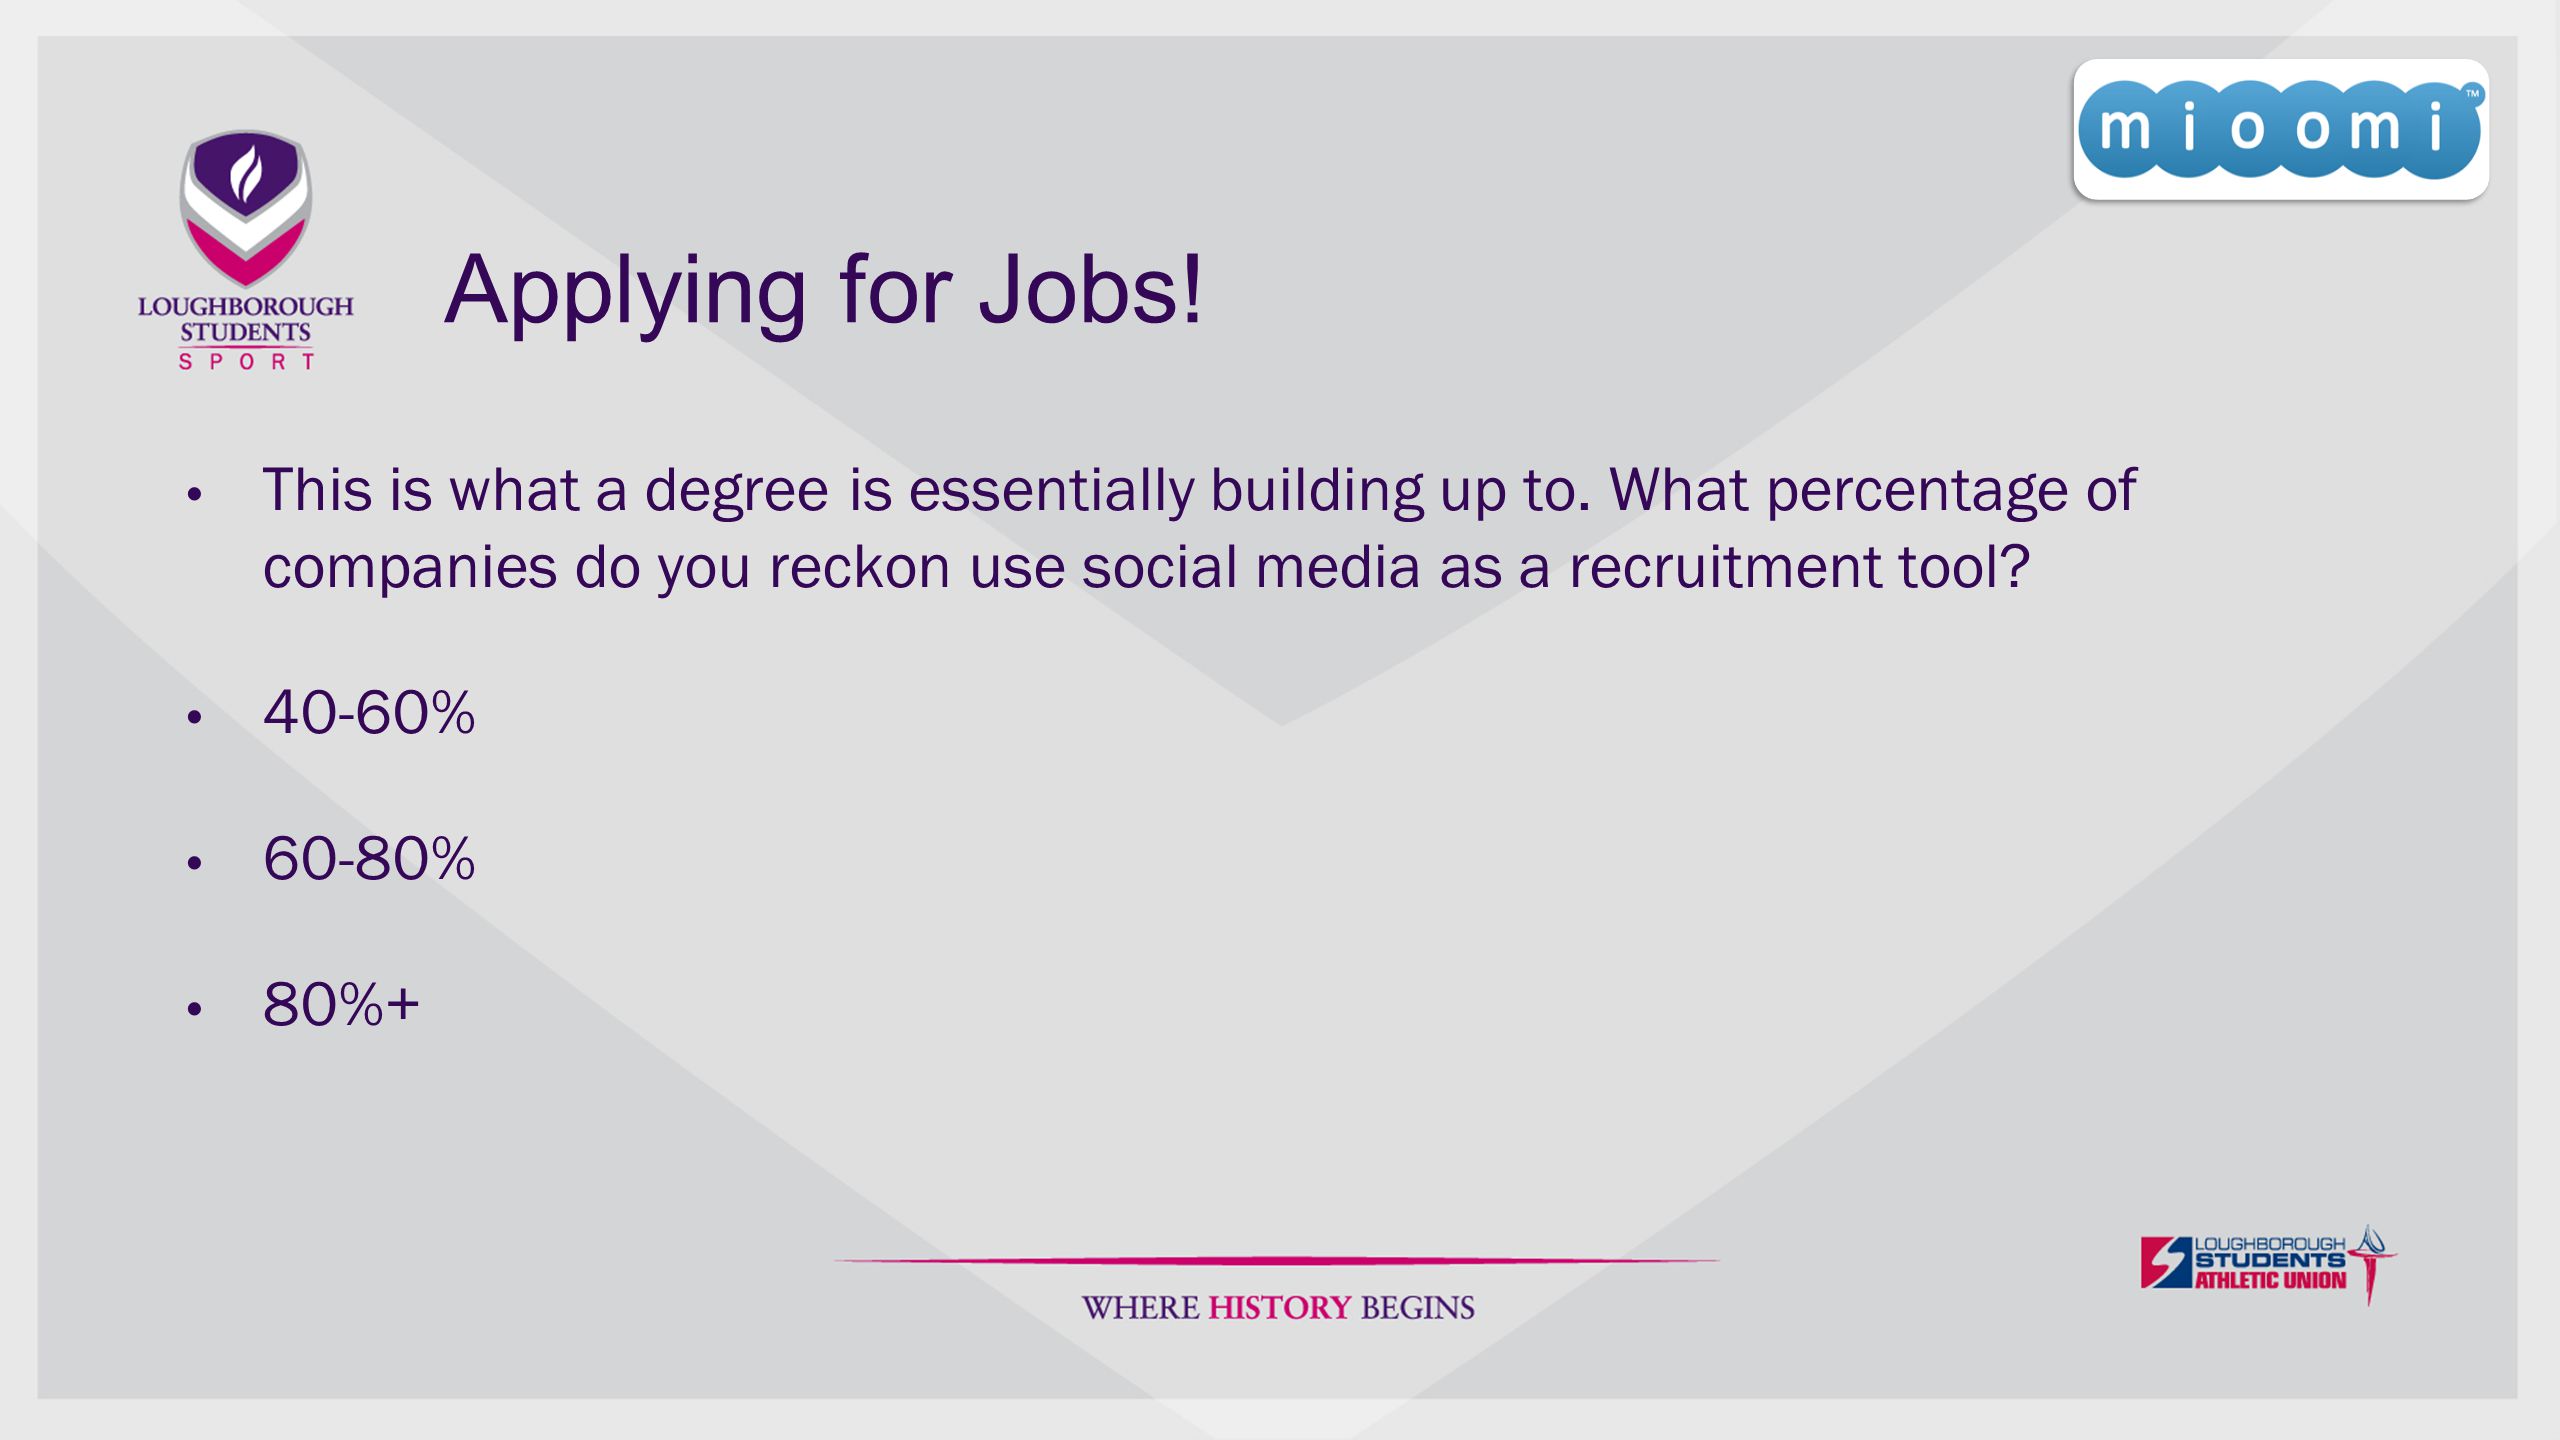 Applying for Jobs. This is what a degree is essentially building up to.